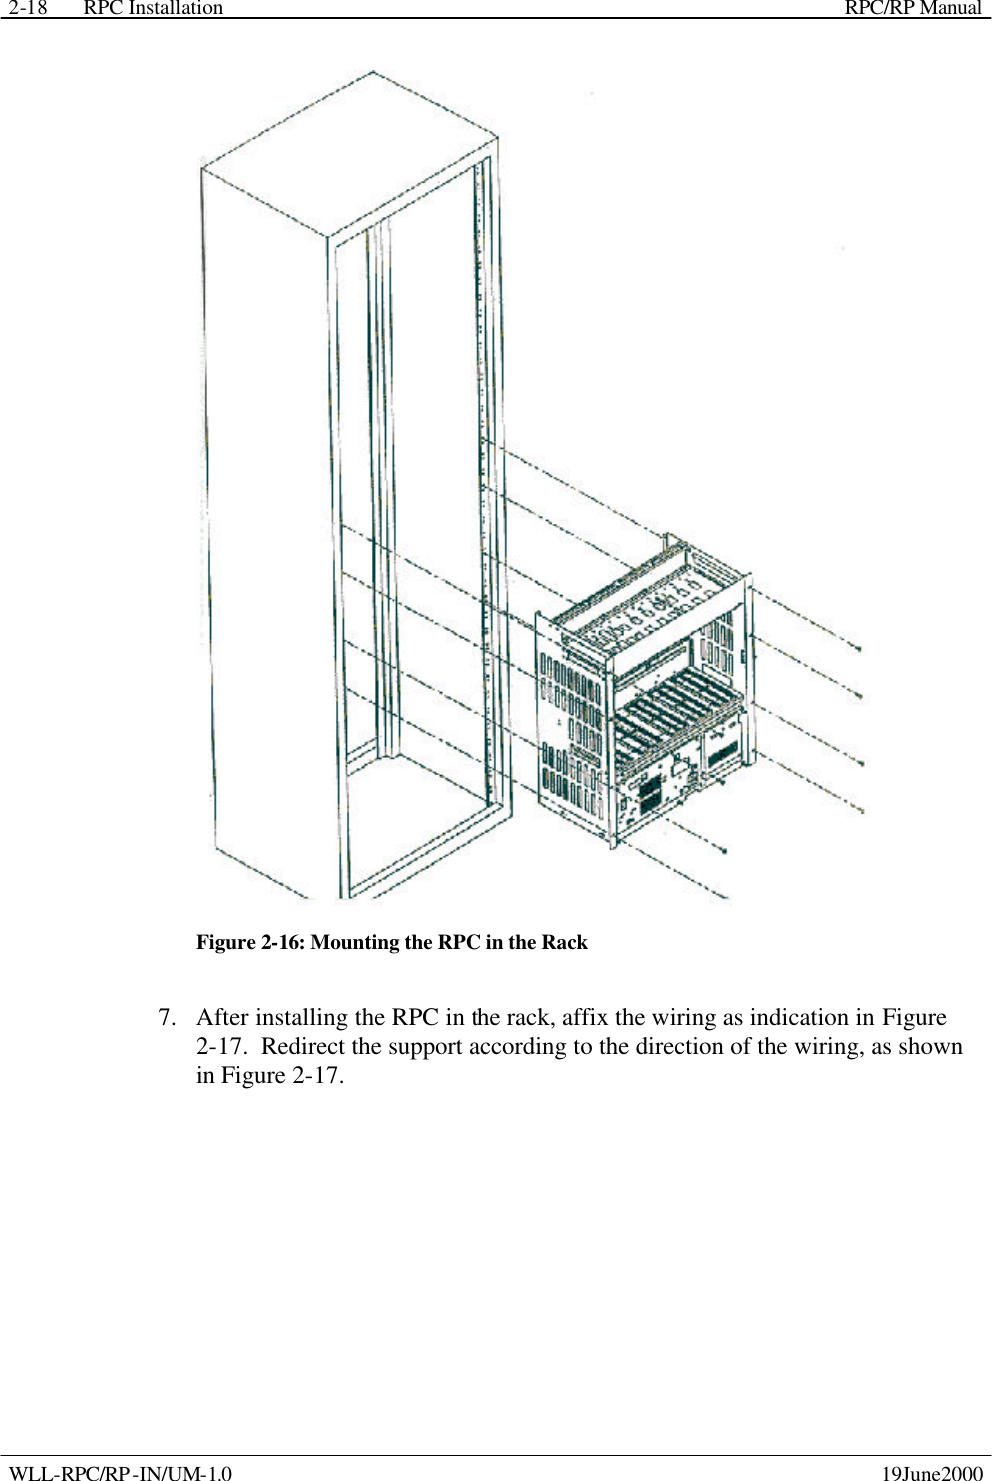 RPC Installation    RPC/RP Manual WLL-RPC/RP-IN/UM-1.0    19June2000 2-18 Figure 2-16: Mounting the RPC in the Rack 7.  After installing the RPC in the rack, affix the wiring as indication in Figure 2-17.  Redirect the support according to the direction of the wiring, as shown in Figure 2-17. 